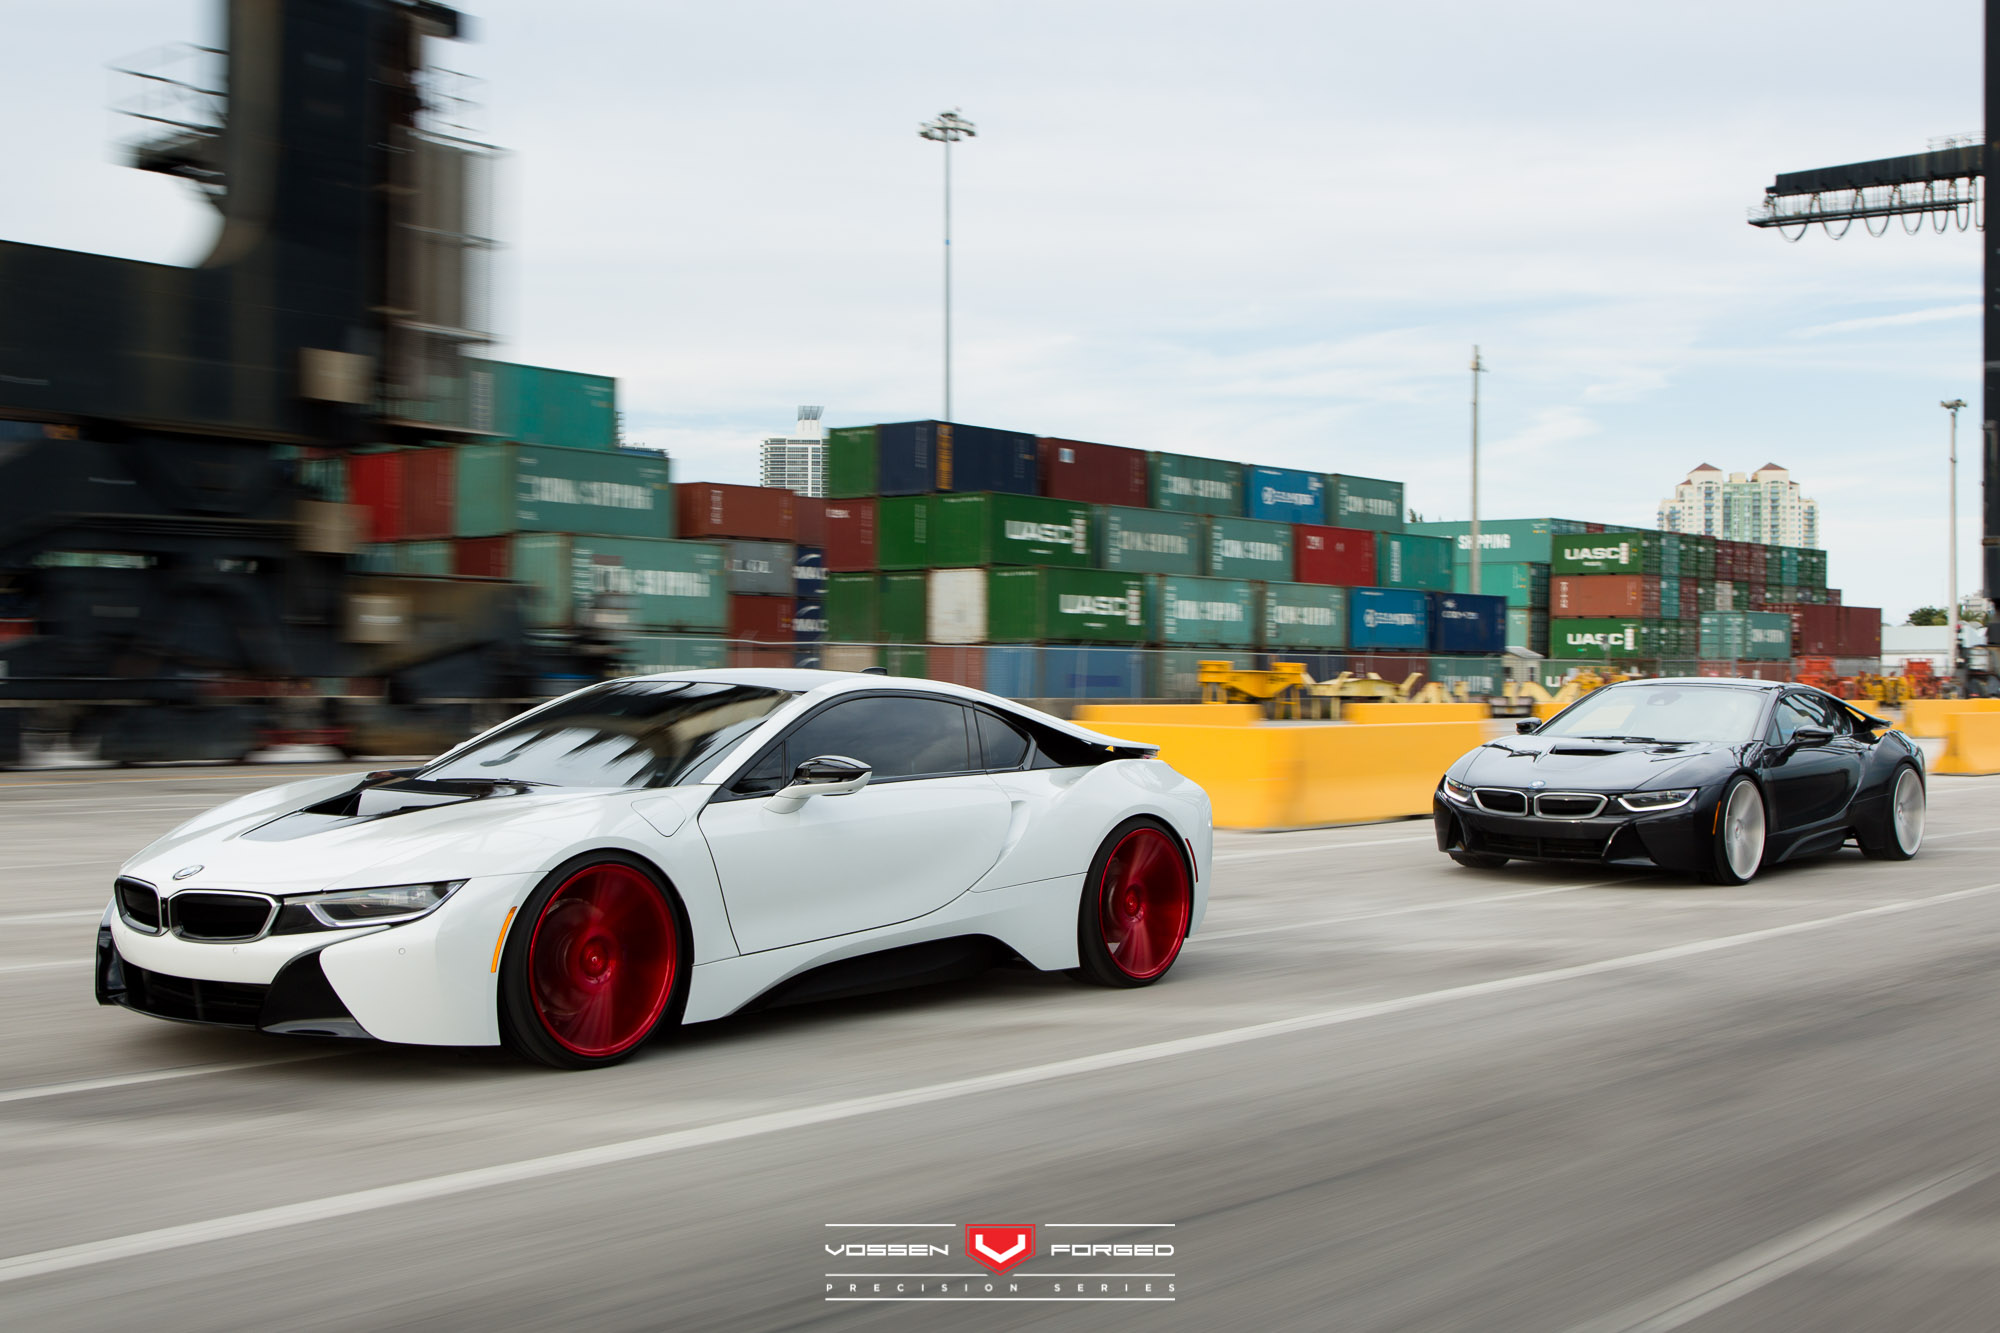 bmw-i8-duo-drift-on-vossen-forged-wheels-in-miami-video-96106_1